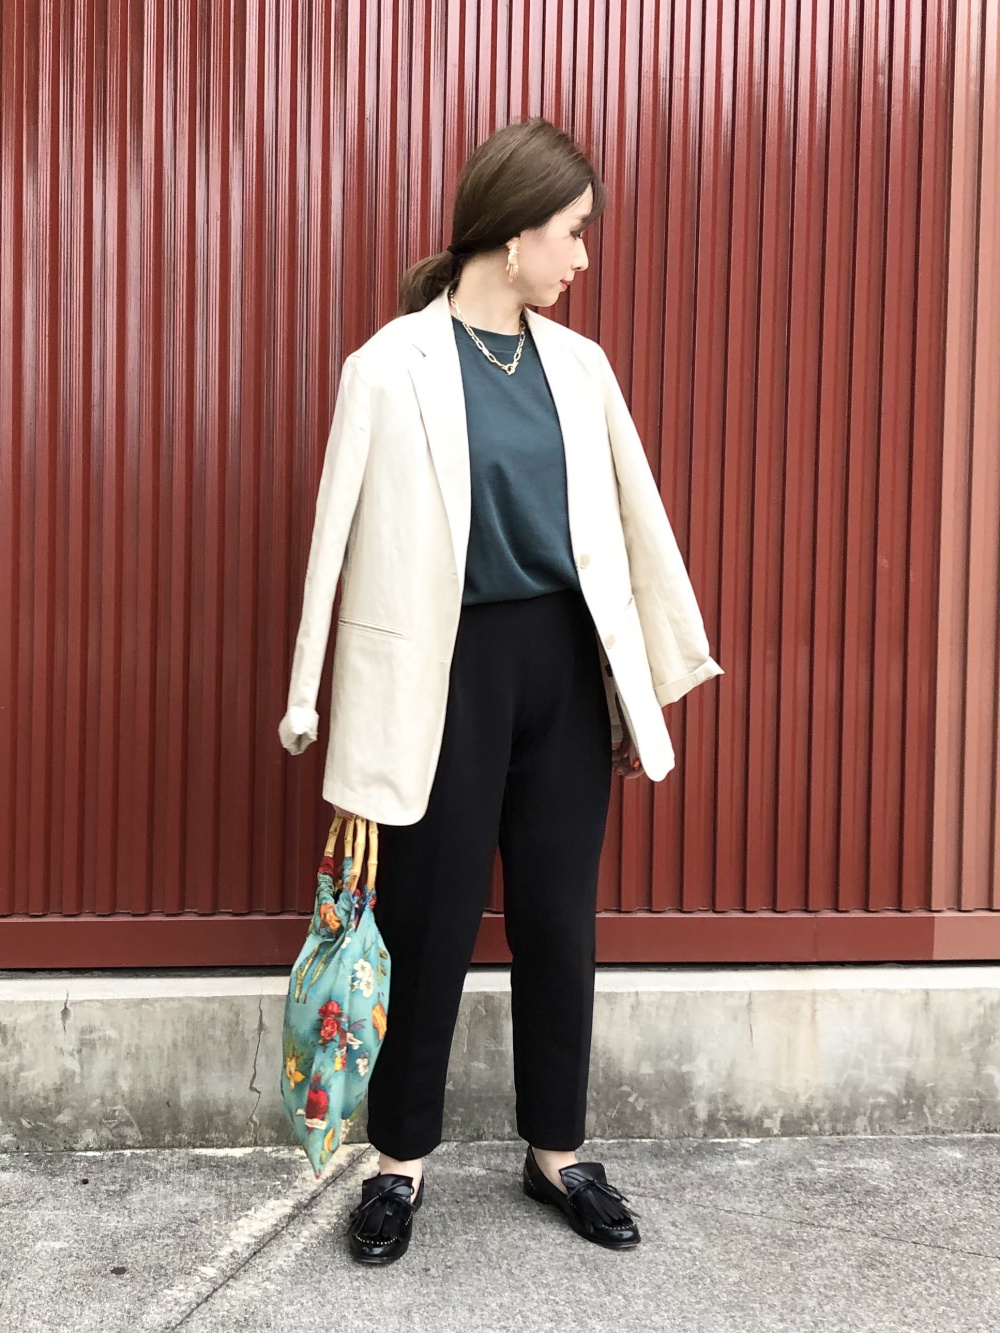 Check styling ideas for「U AIRism Cotton Oversized Crew Neck Half